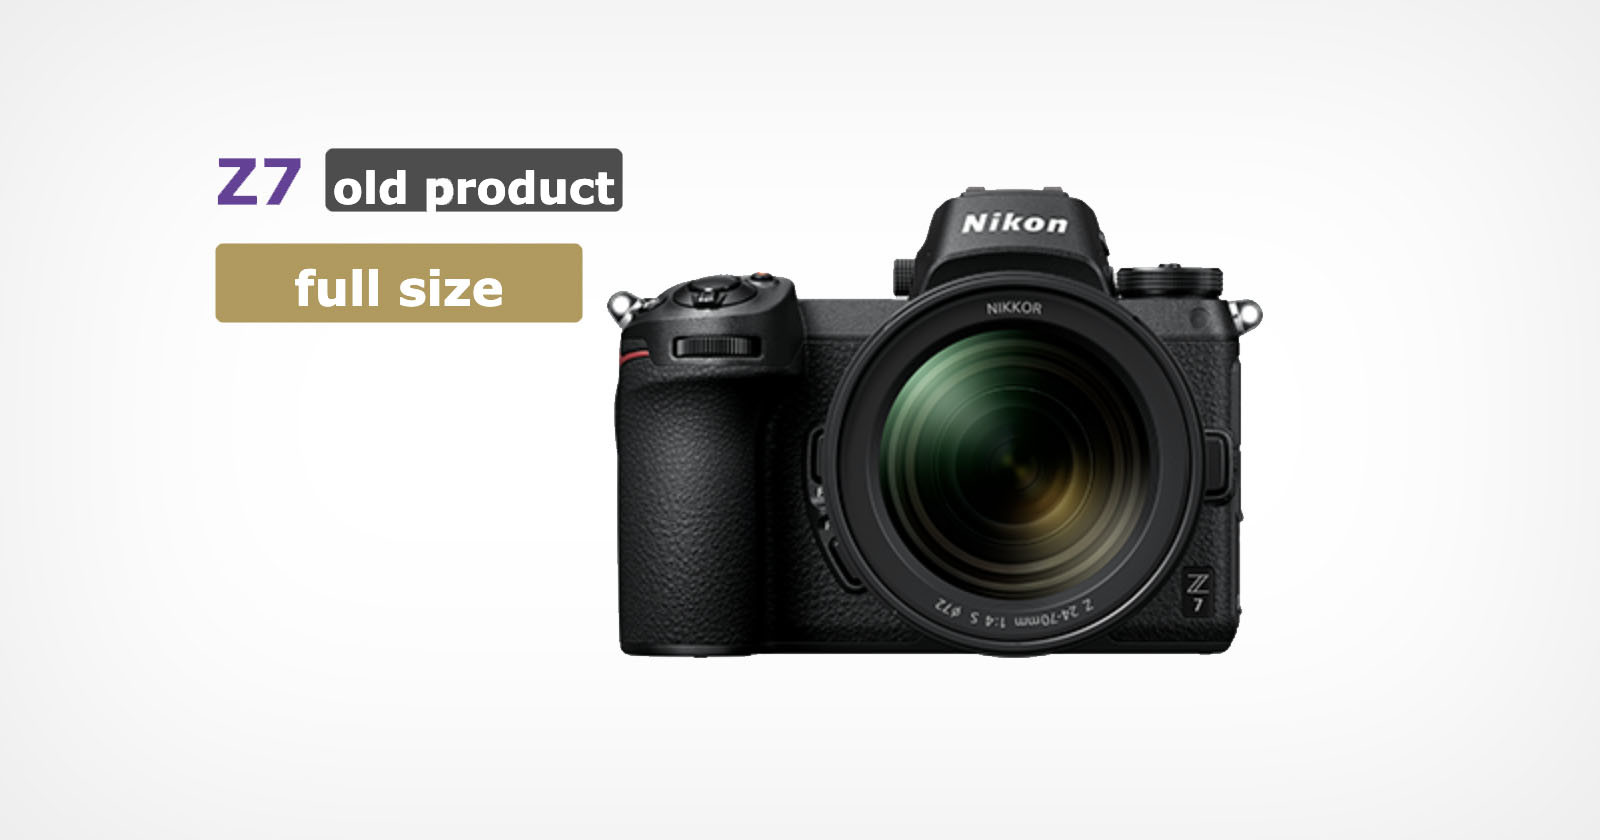 It Looks Like the Nikon Z7 is Being Discontinued